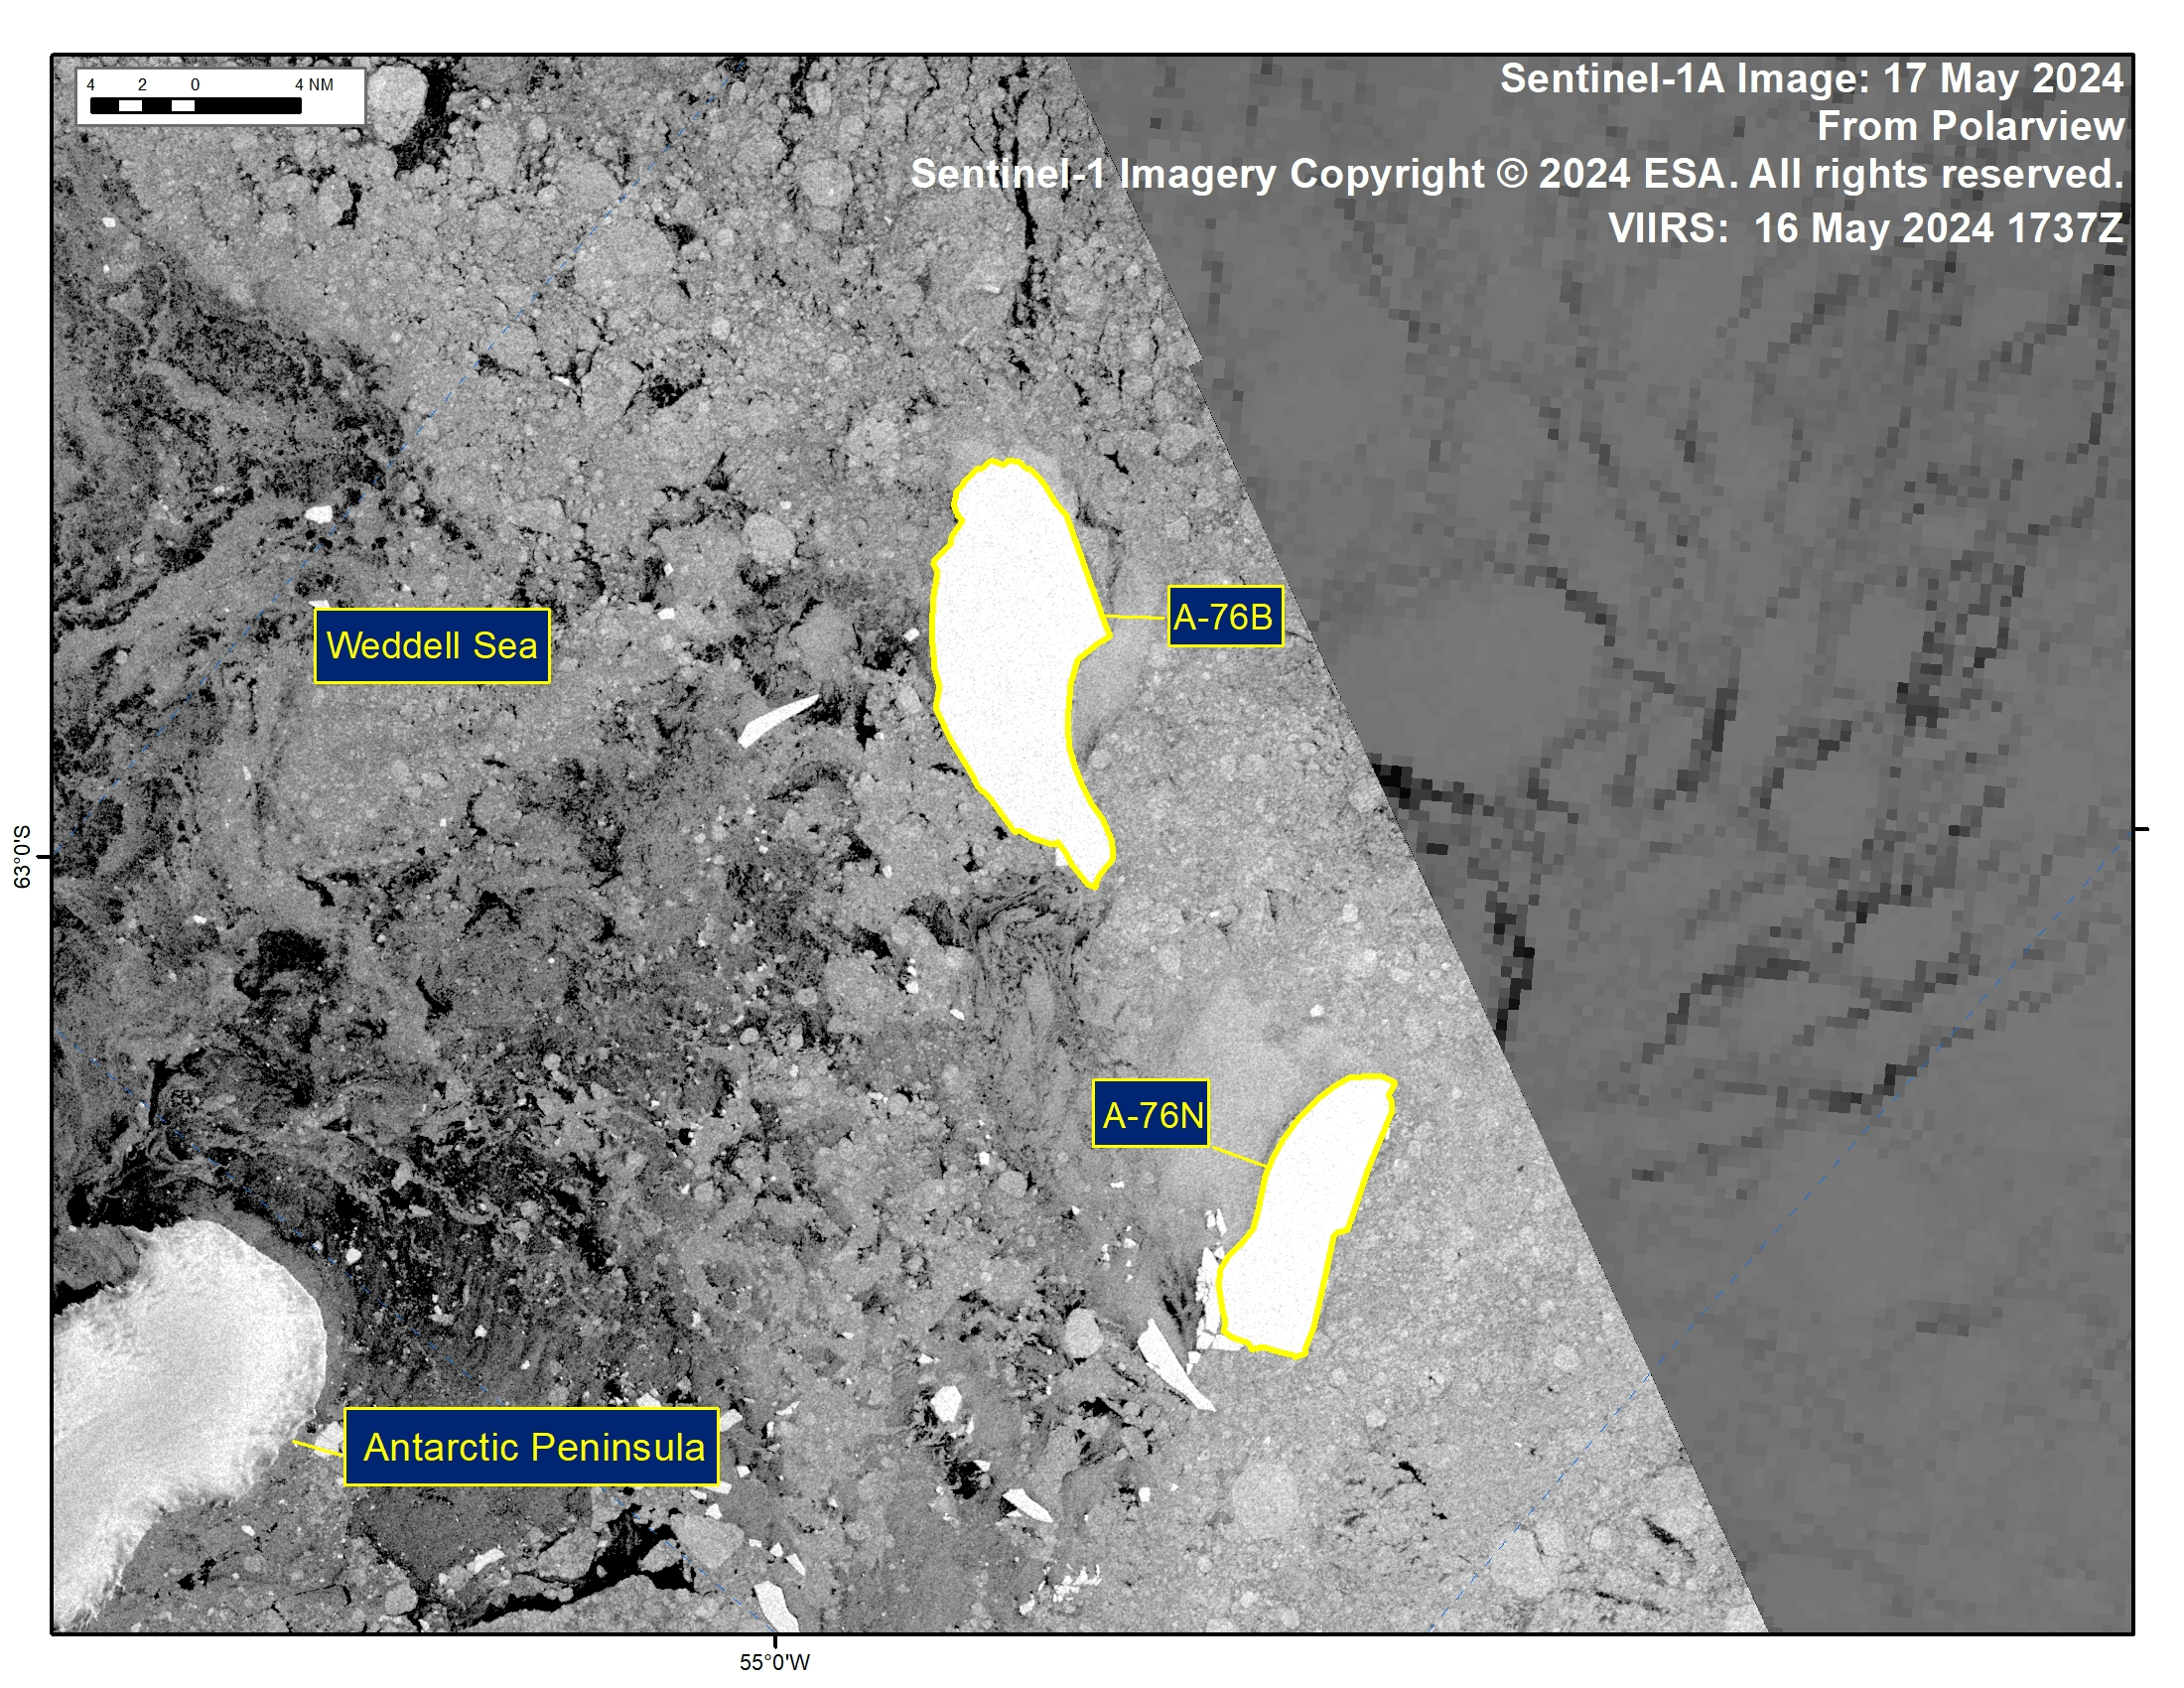 Sentinel-1A image of A-76N